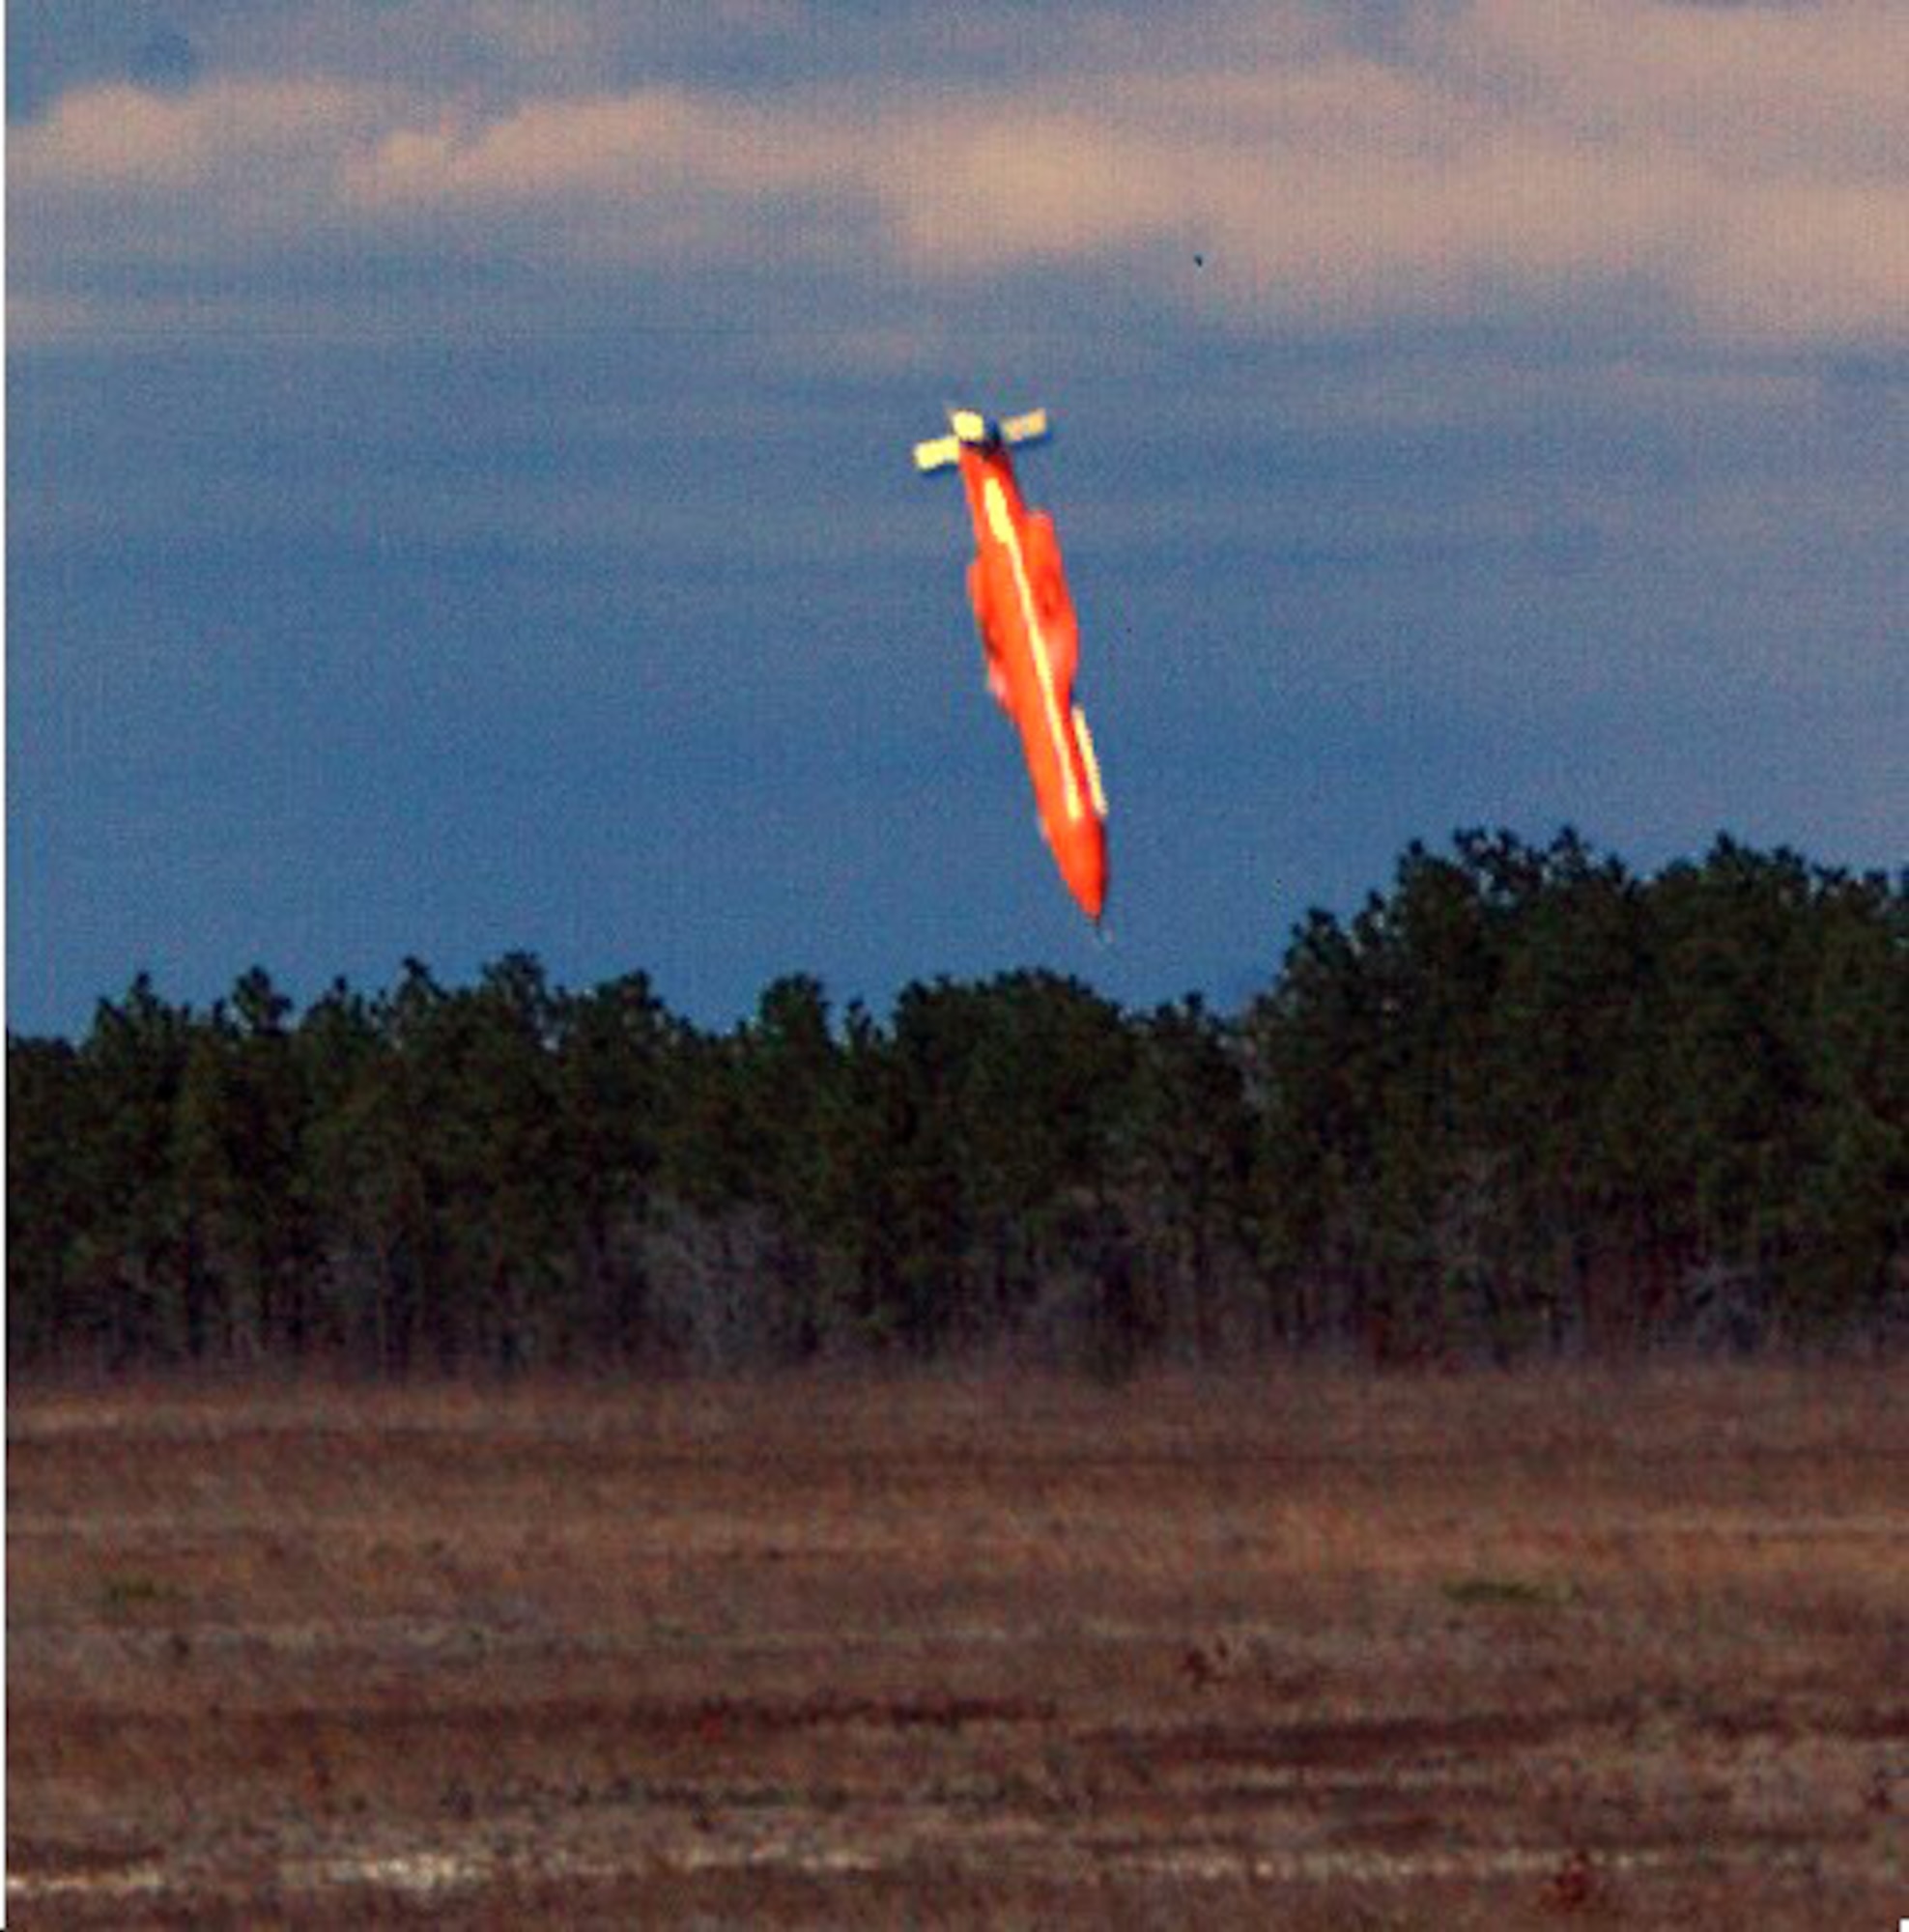 The GBU-43/B Massive Ordnance Air Blast bomb prototype is shown moments before impact March 11, 2003. The detonation created a mushroom cloud that could be seen 20 miles away. (Courtesy photo)